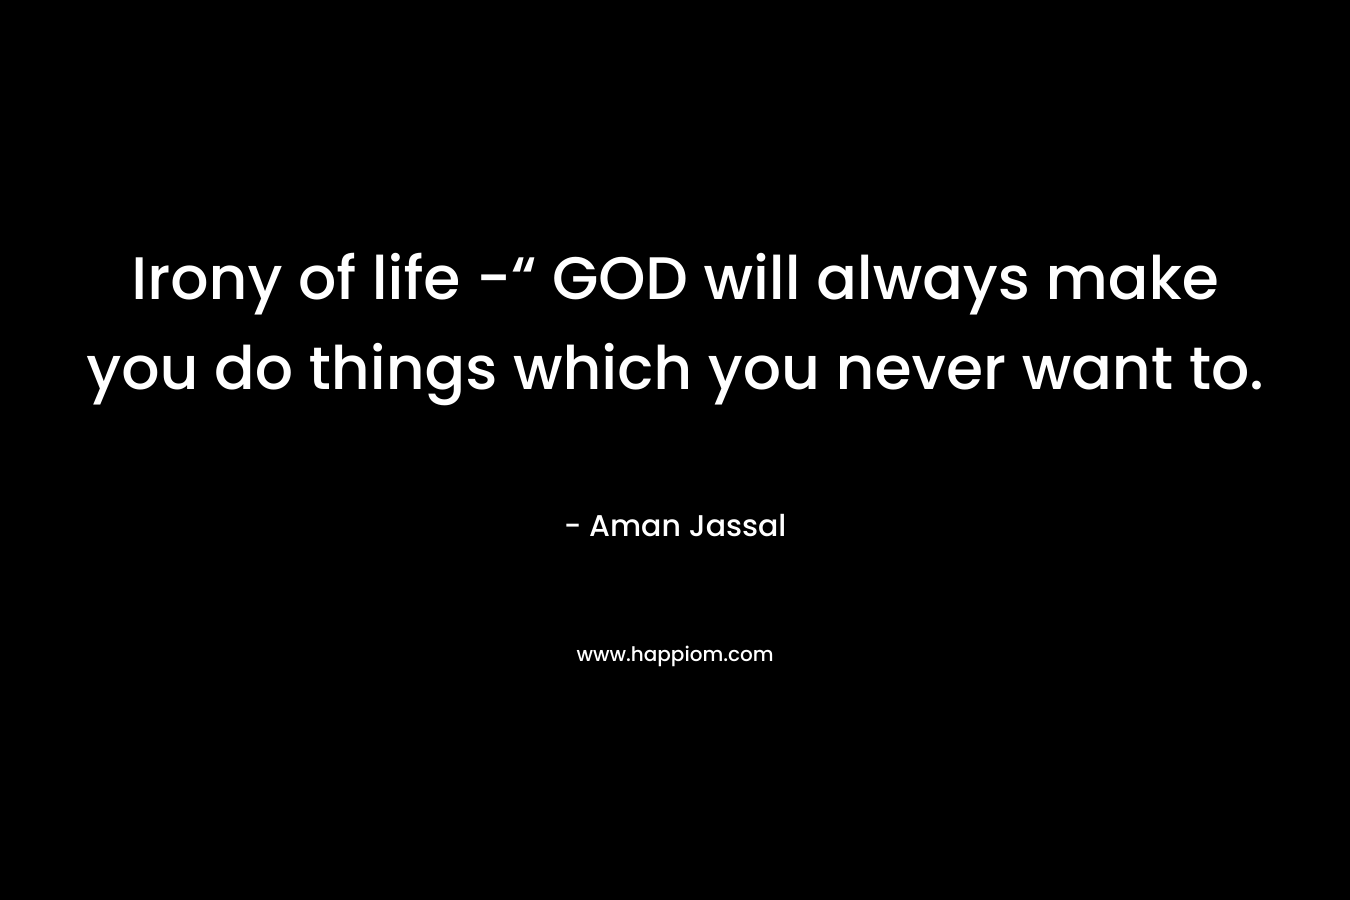 Irony of life -“ GOD will always make you do things which you never want to.